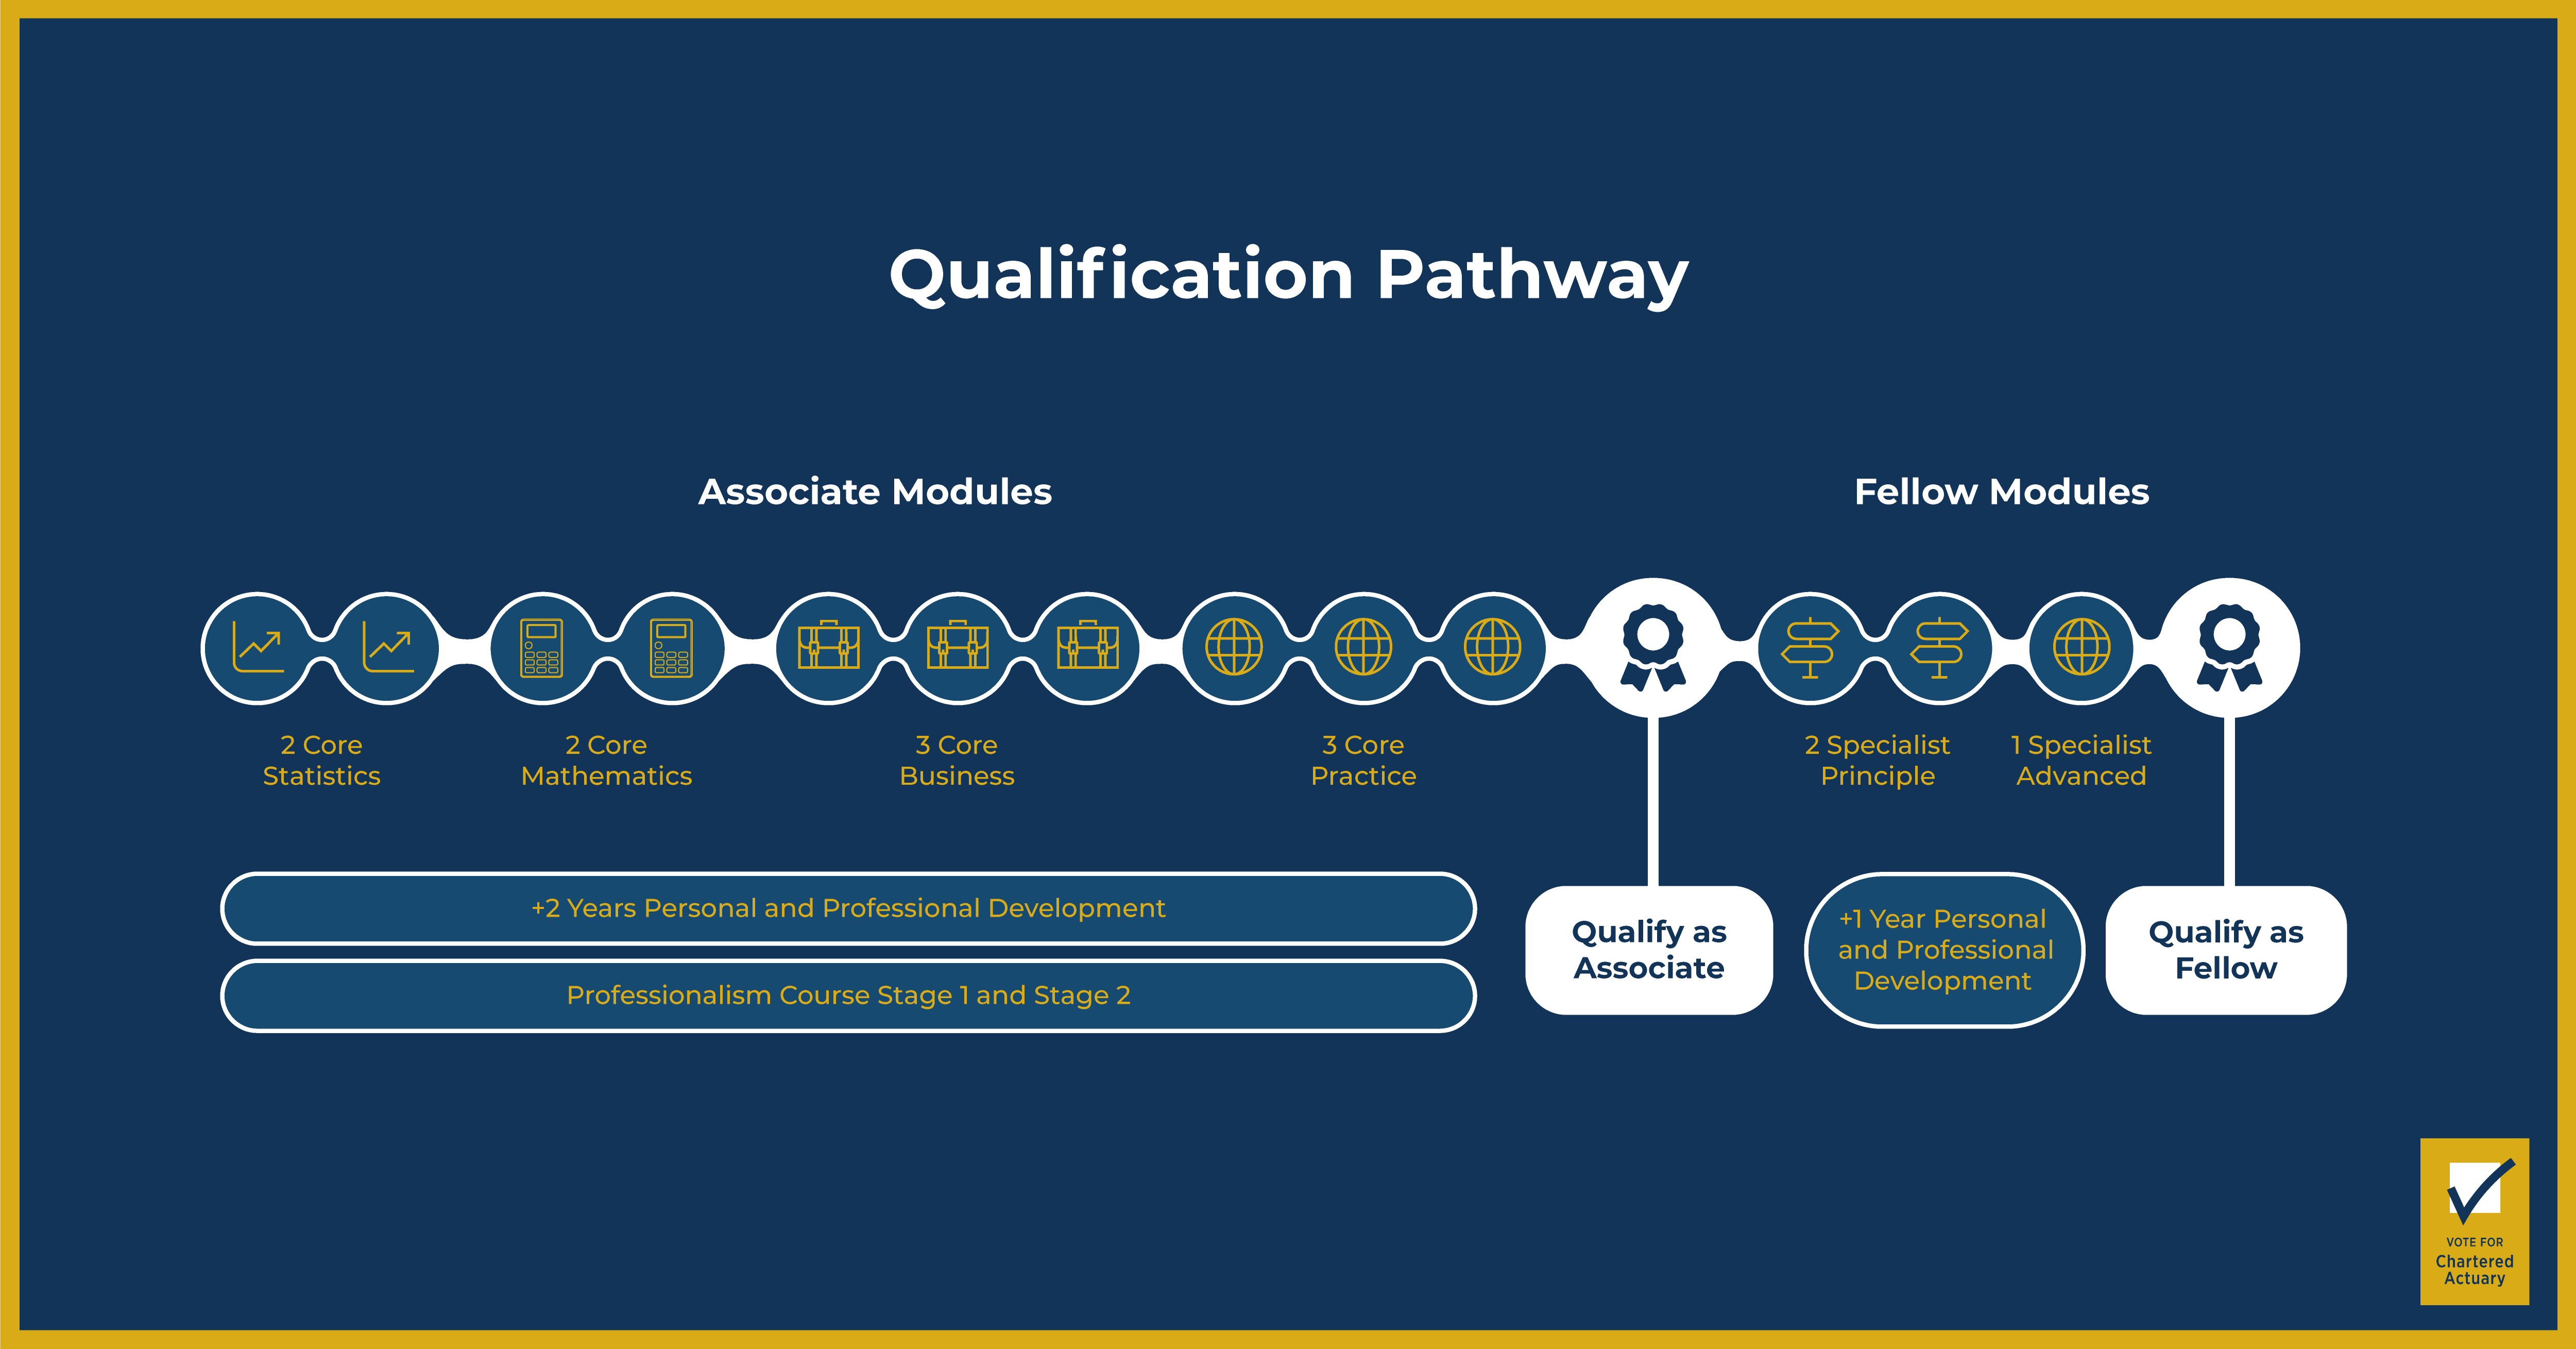 Diagram showing the IFoA qualification pathway. It shows the 10 examinations and 2 years experiential requirement Students must pass to qualify as an Associate member. It also shows the additional 4 examinations and 1 year experience to qualify as a Fellow.